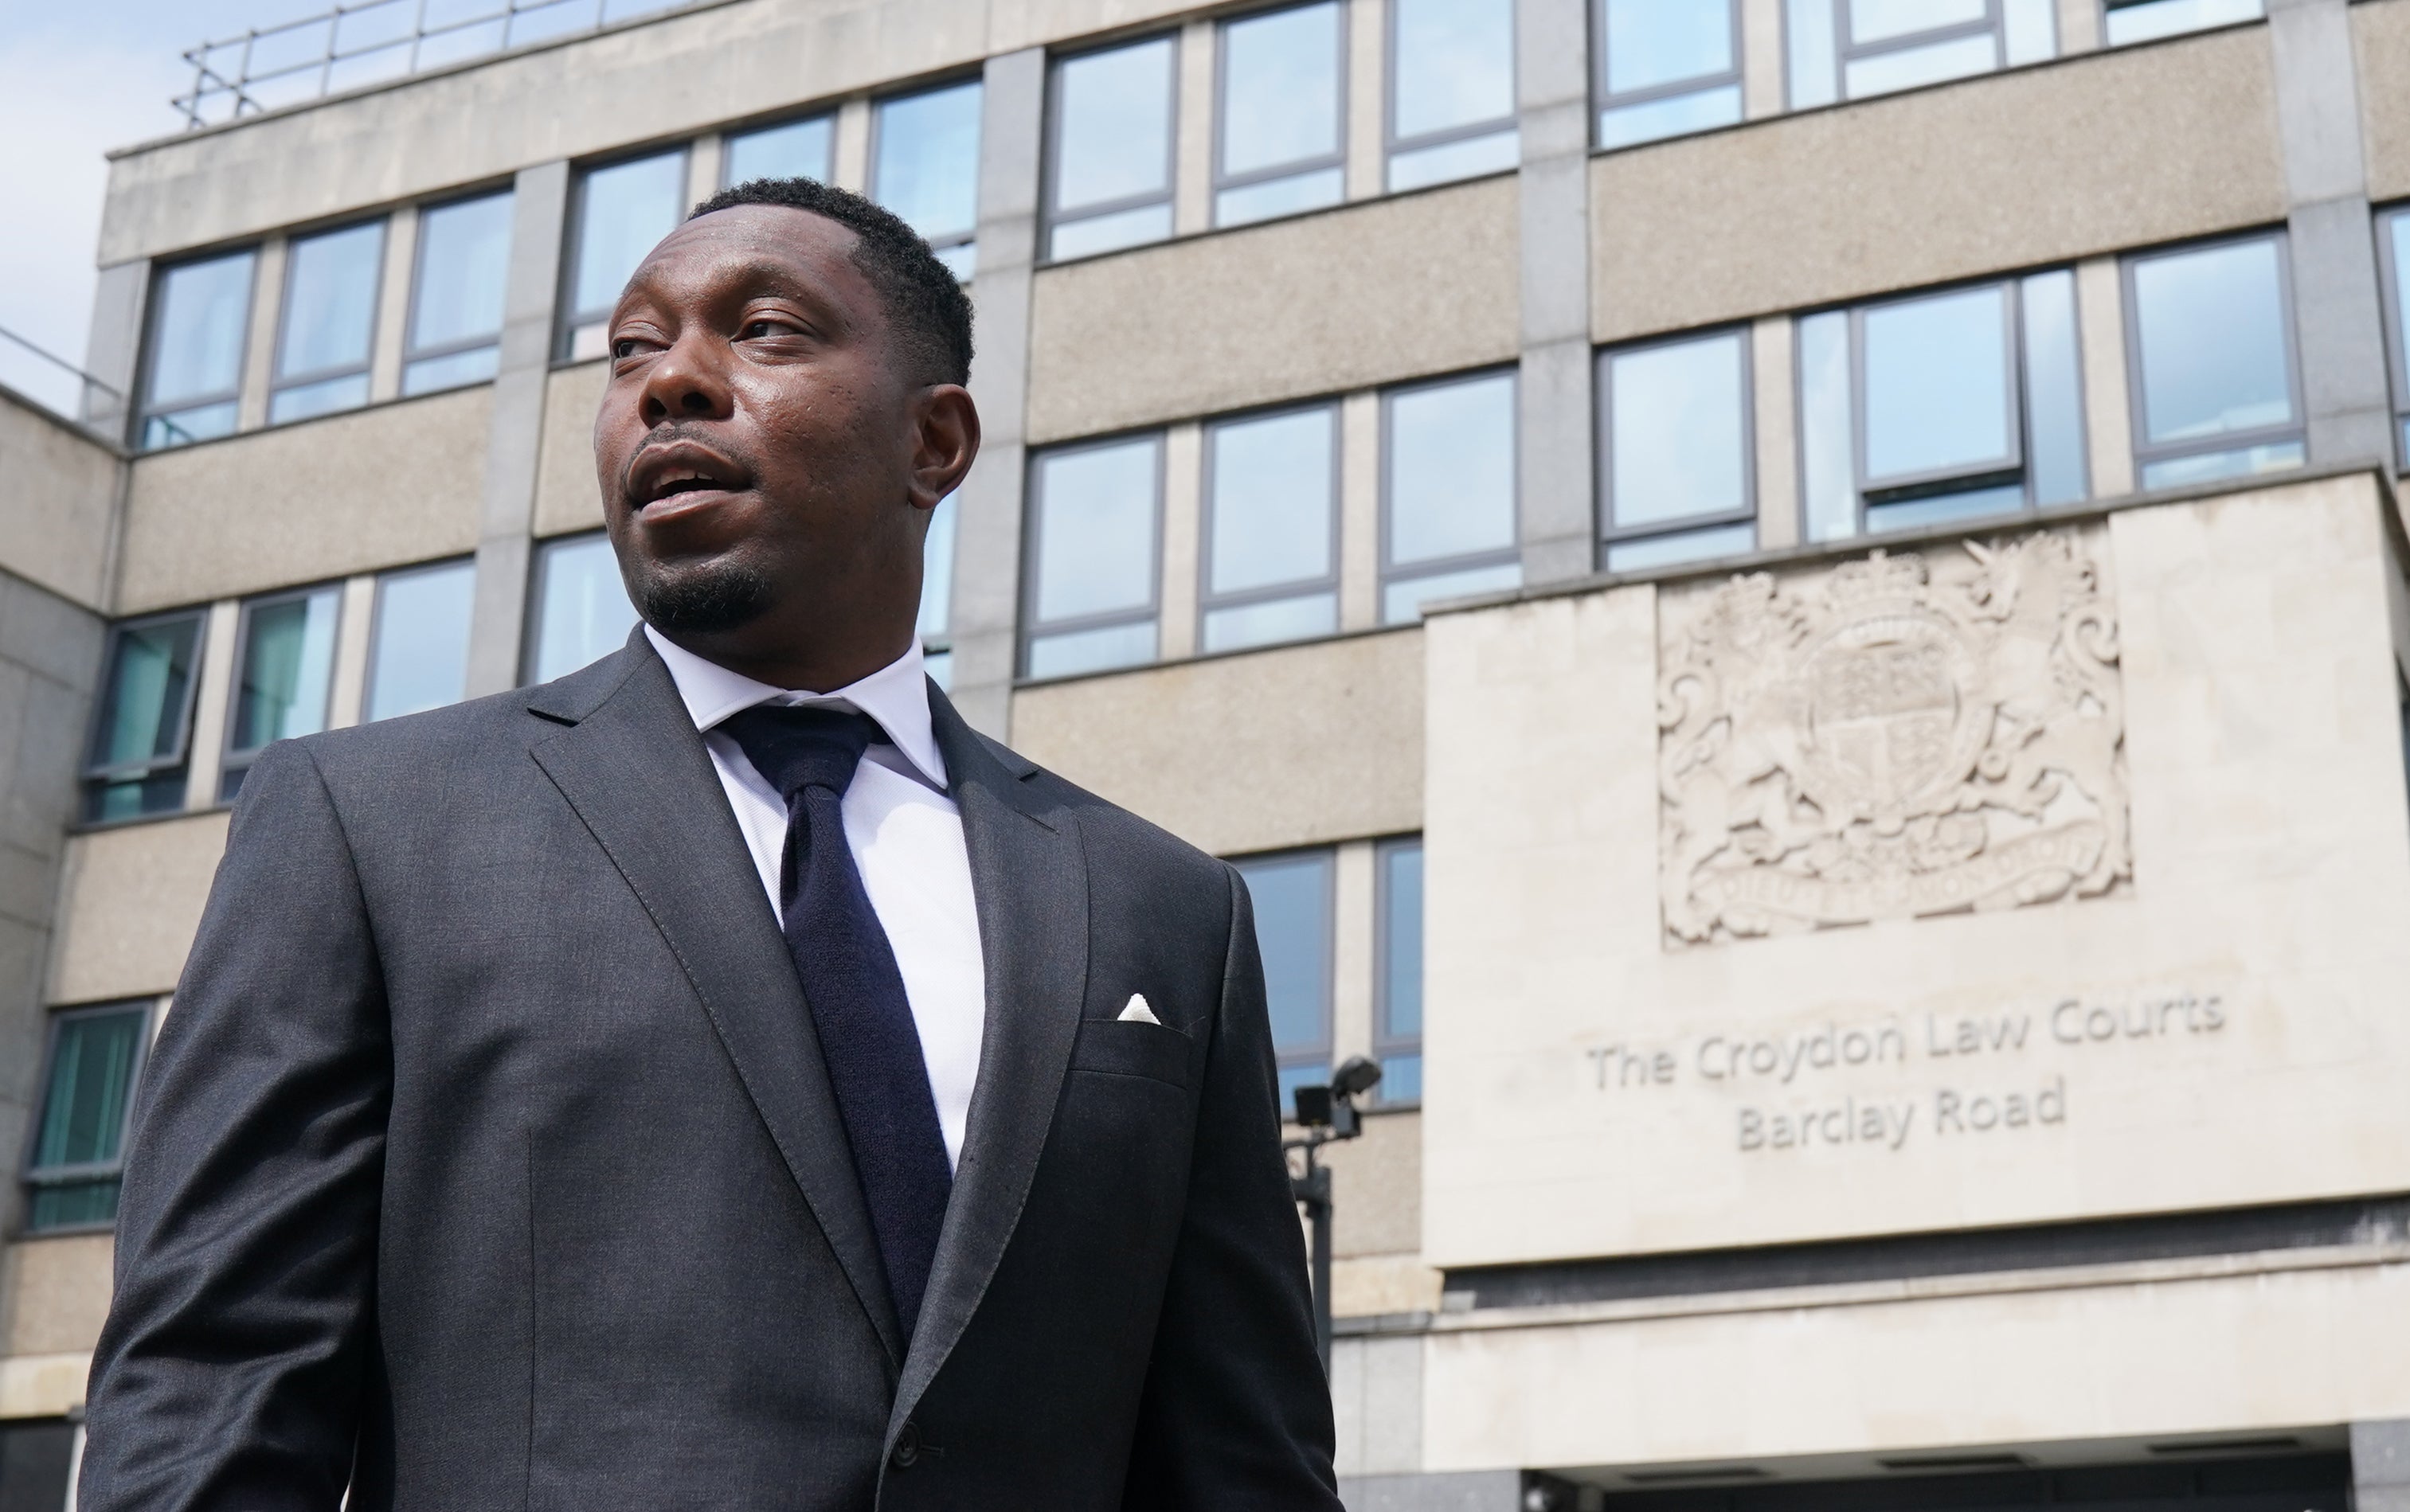 Dizzee Rascal is on trial for alleged assault